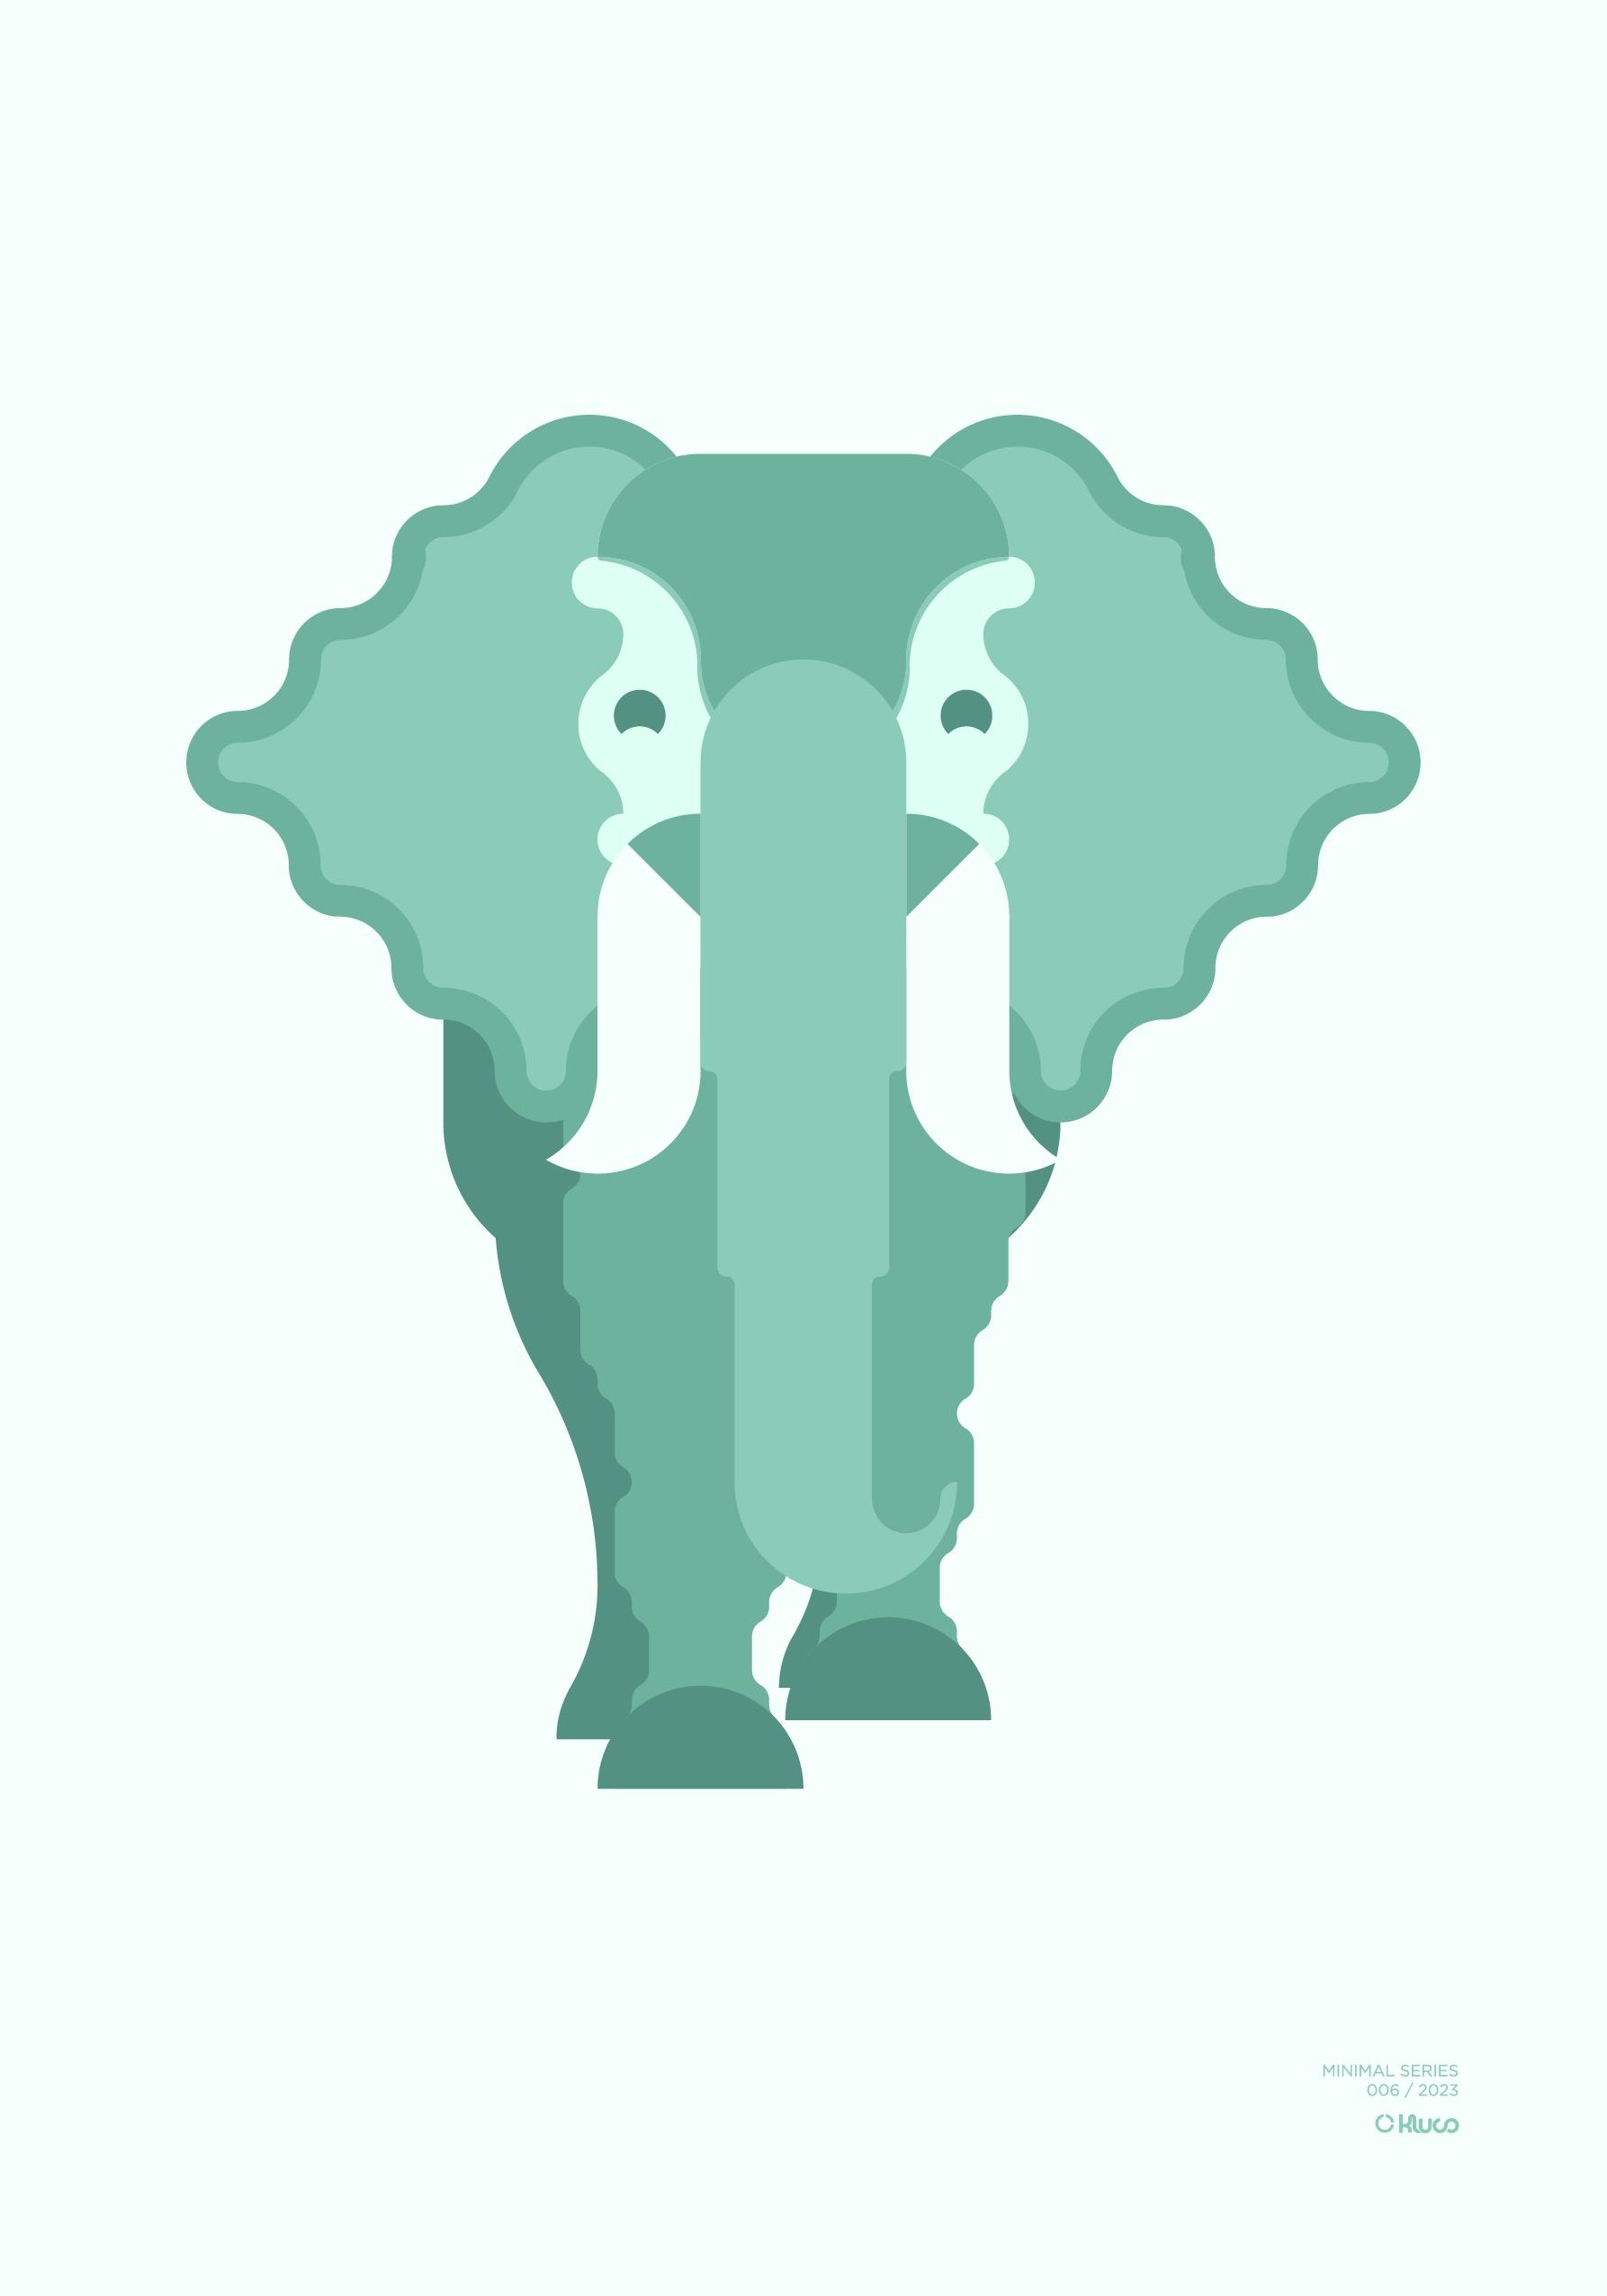 Minimalist-style poster of a elephant